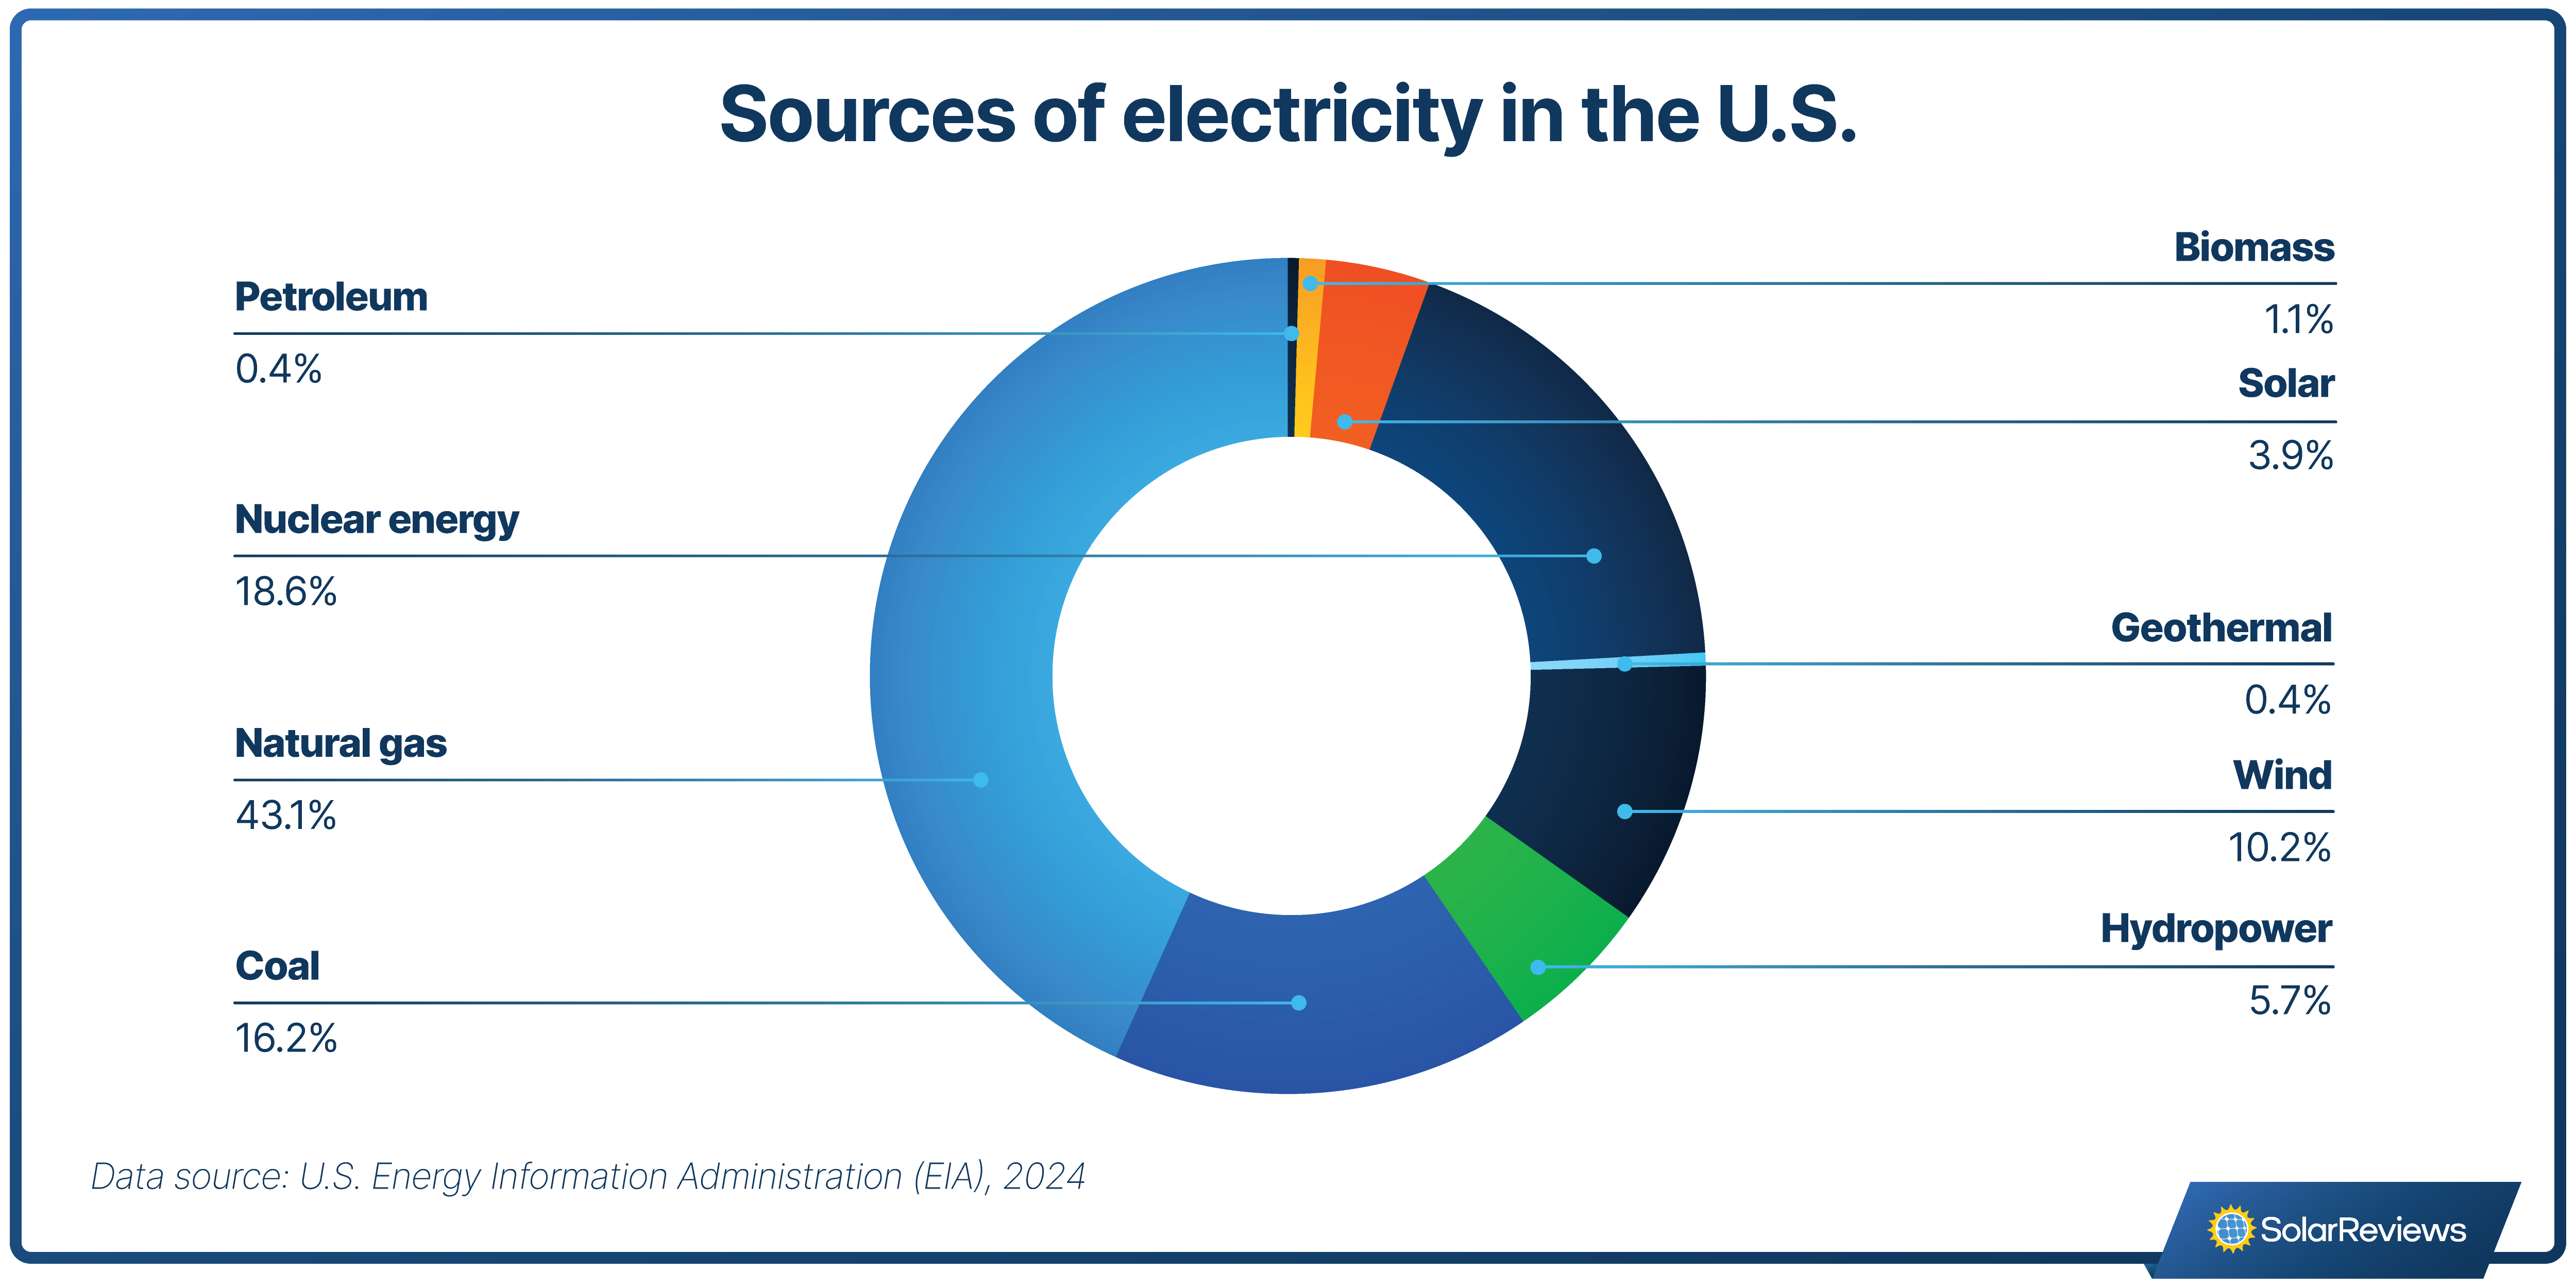 Breakdown of energy sources used in the U.S. in 2024. Biomass: 1.1% | Solar: 3.9% | Geothermal: 0.4% | Wind: 10.2% | Hyrdopower: 5.7% | Coal: 16.2% | Natural gas: 43.1% | Nuclear energy: 18.6% | Petroleum: 0.4%